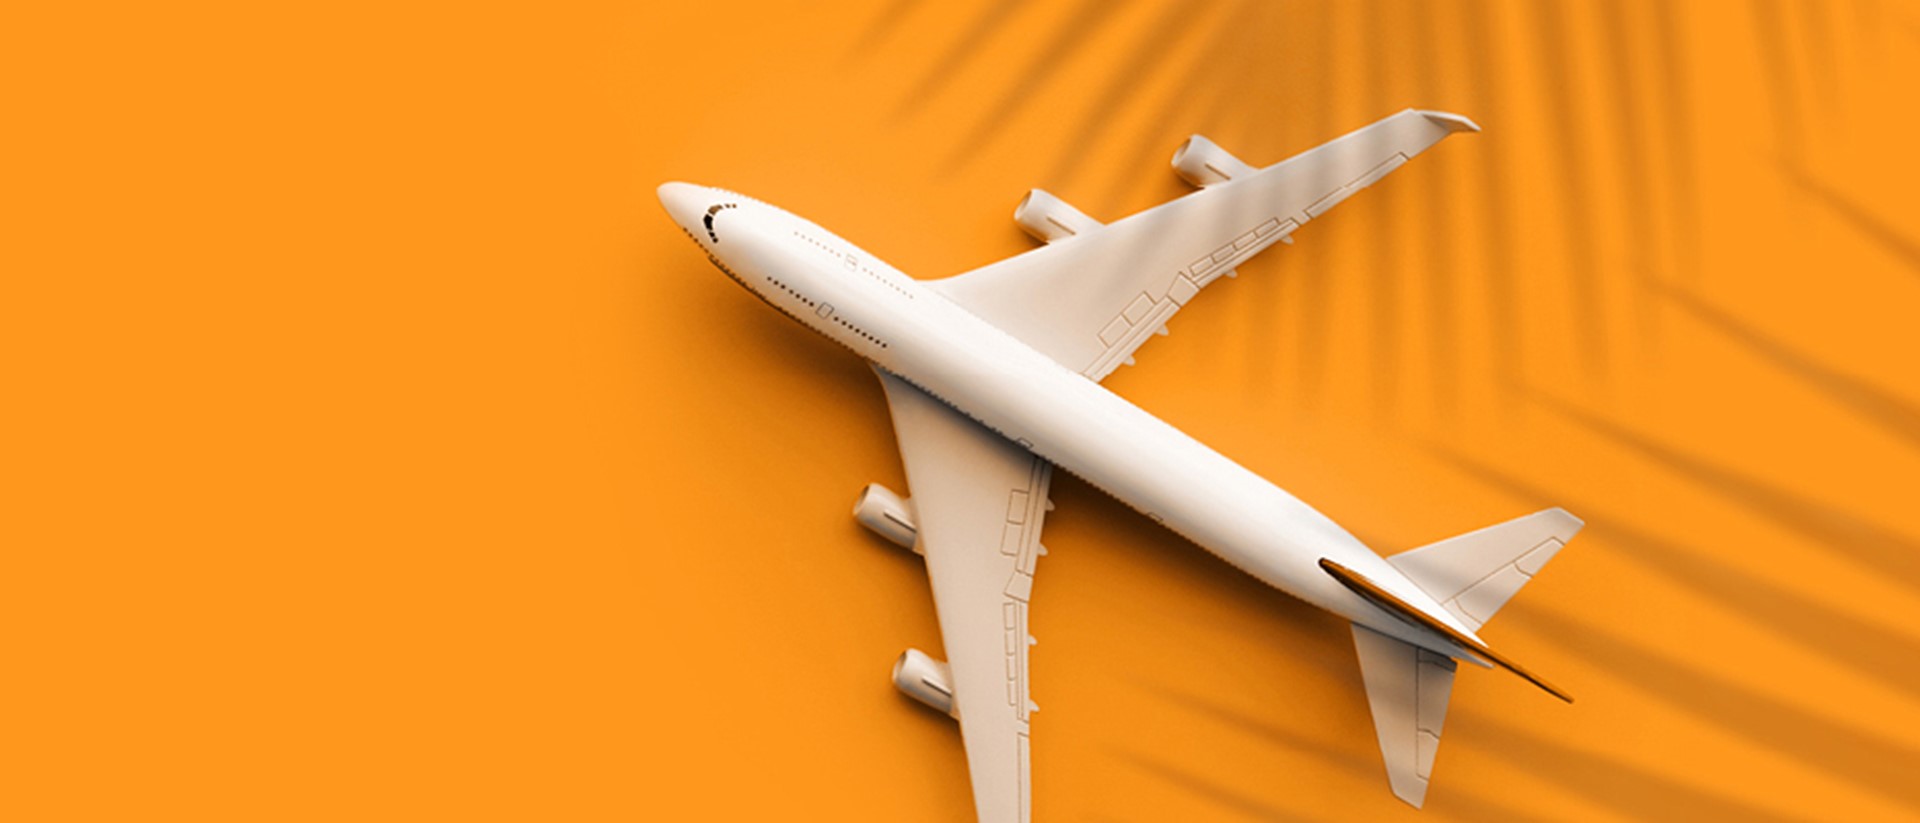 Image of a plane on an orange background